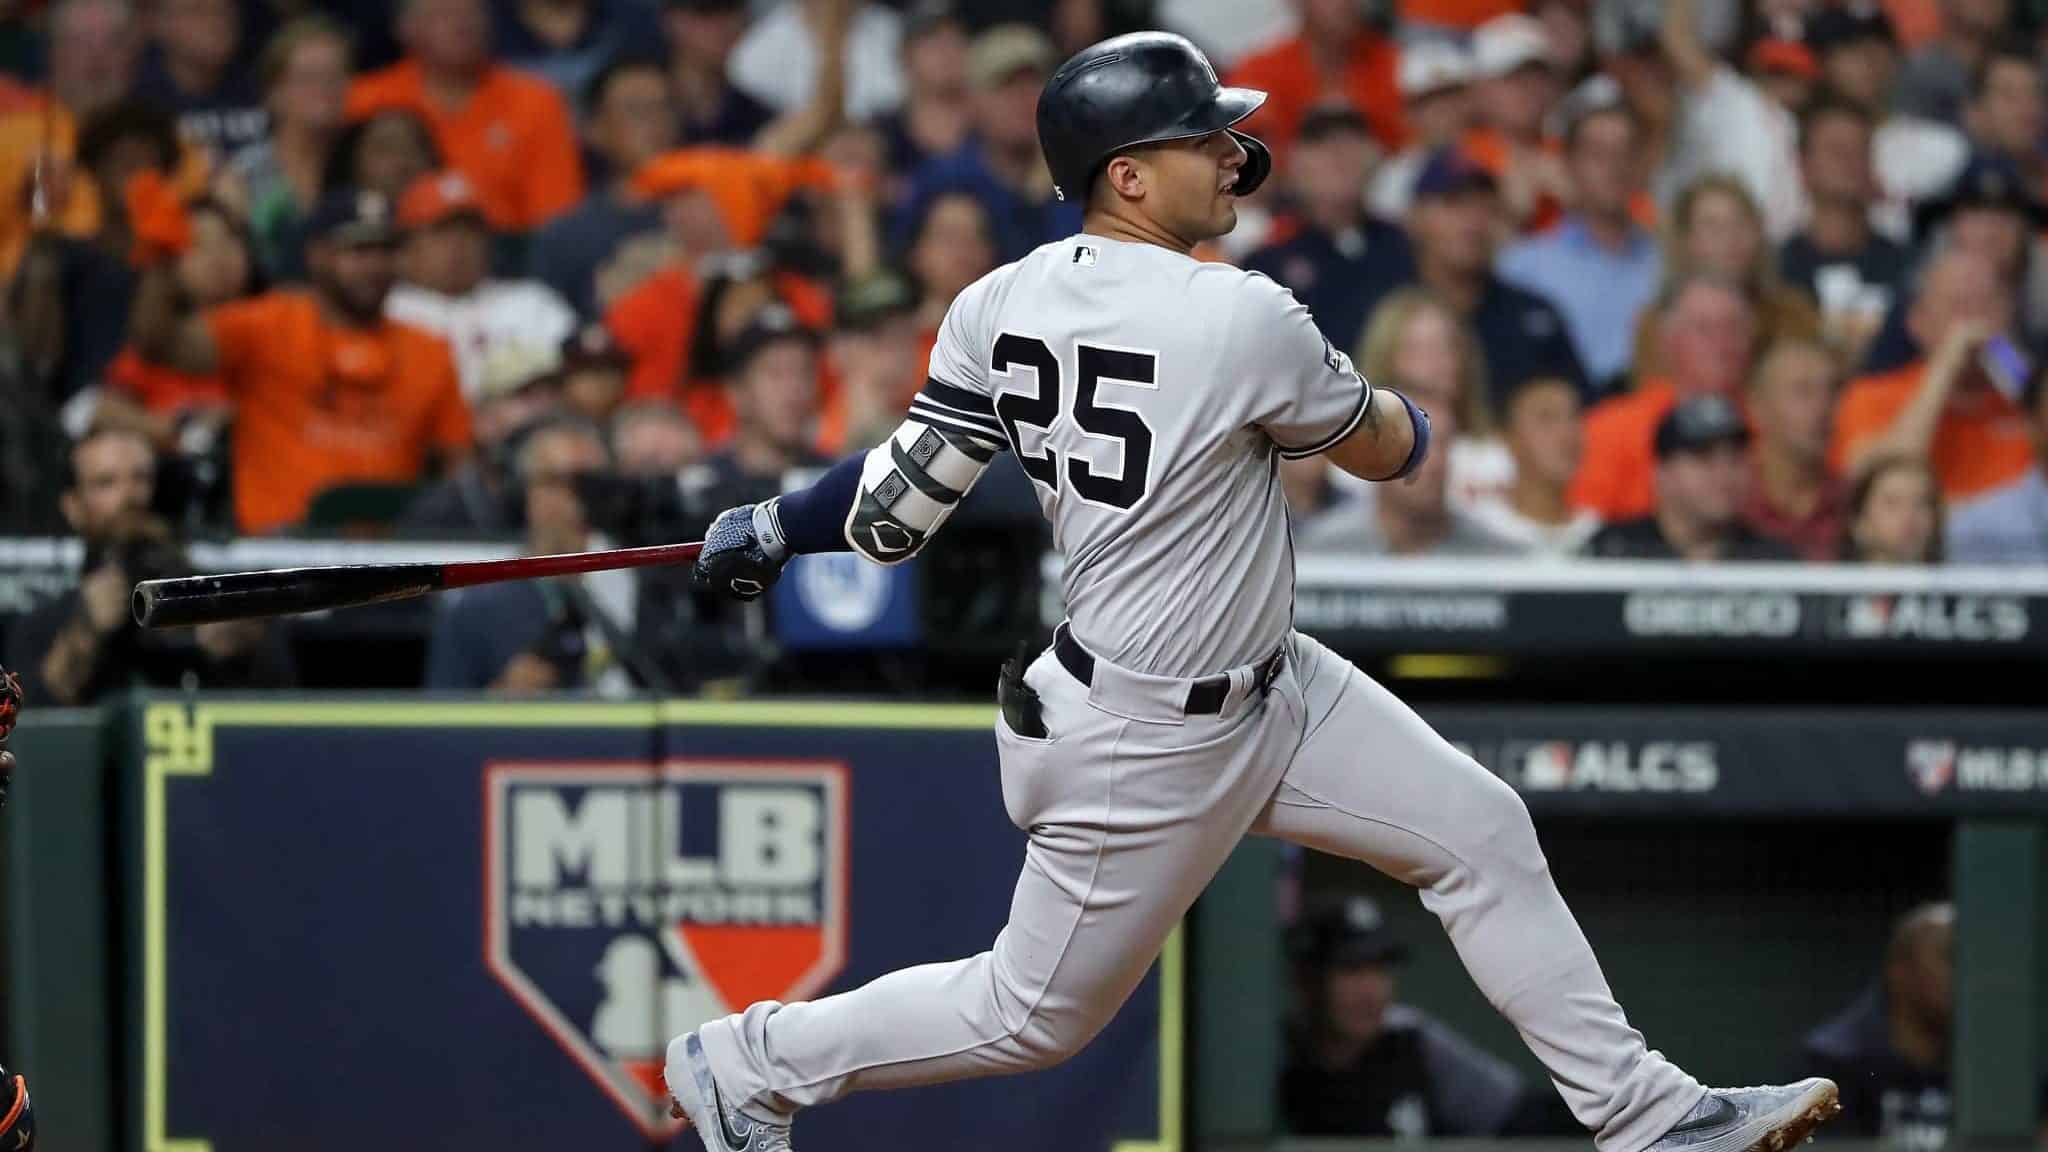 HOUSTON, TEXAS - OCTOBER 19: Gleyber Torres #25 of the New York Yankees hits a single against the Houston Astros during the third inning in game six of the American League Championship Series at Minute Maid Park on October 19, 2019 in Houston, Texas.